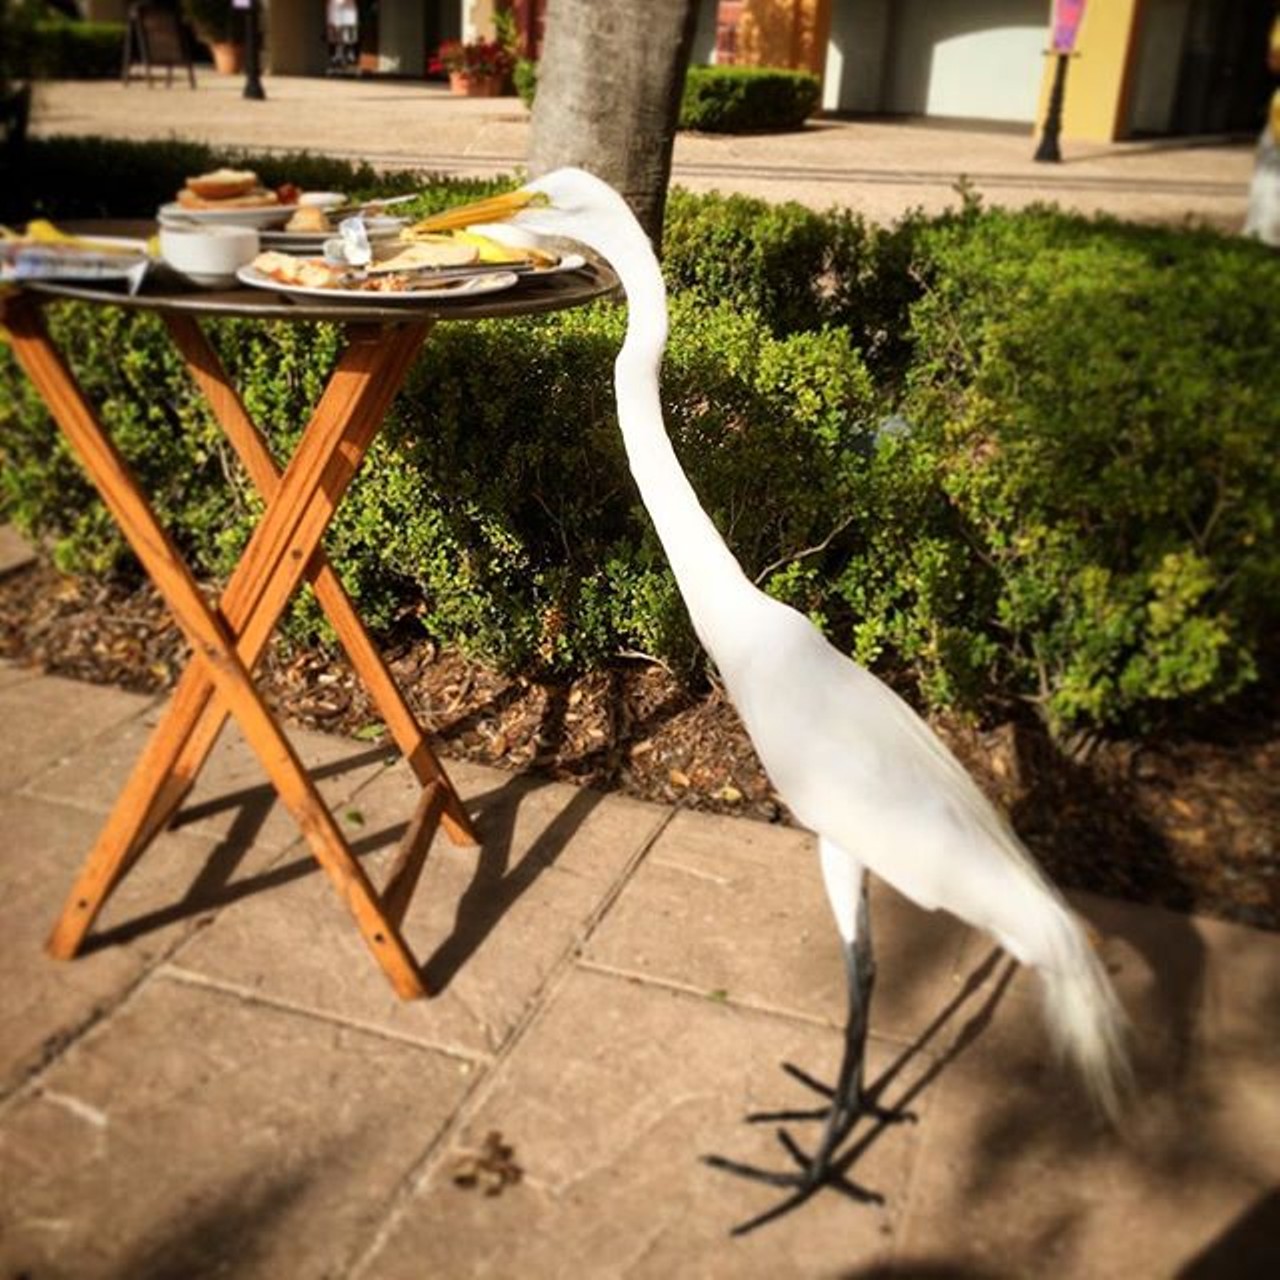 This bird was tryin' to score a free lunch. Photo via